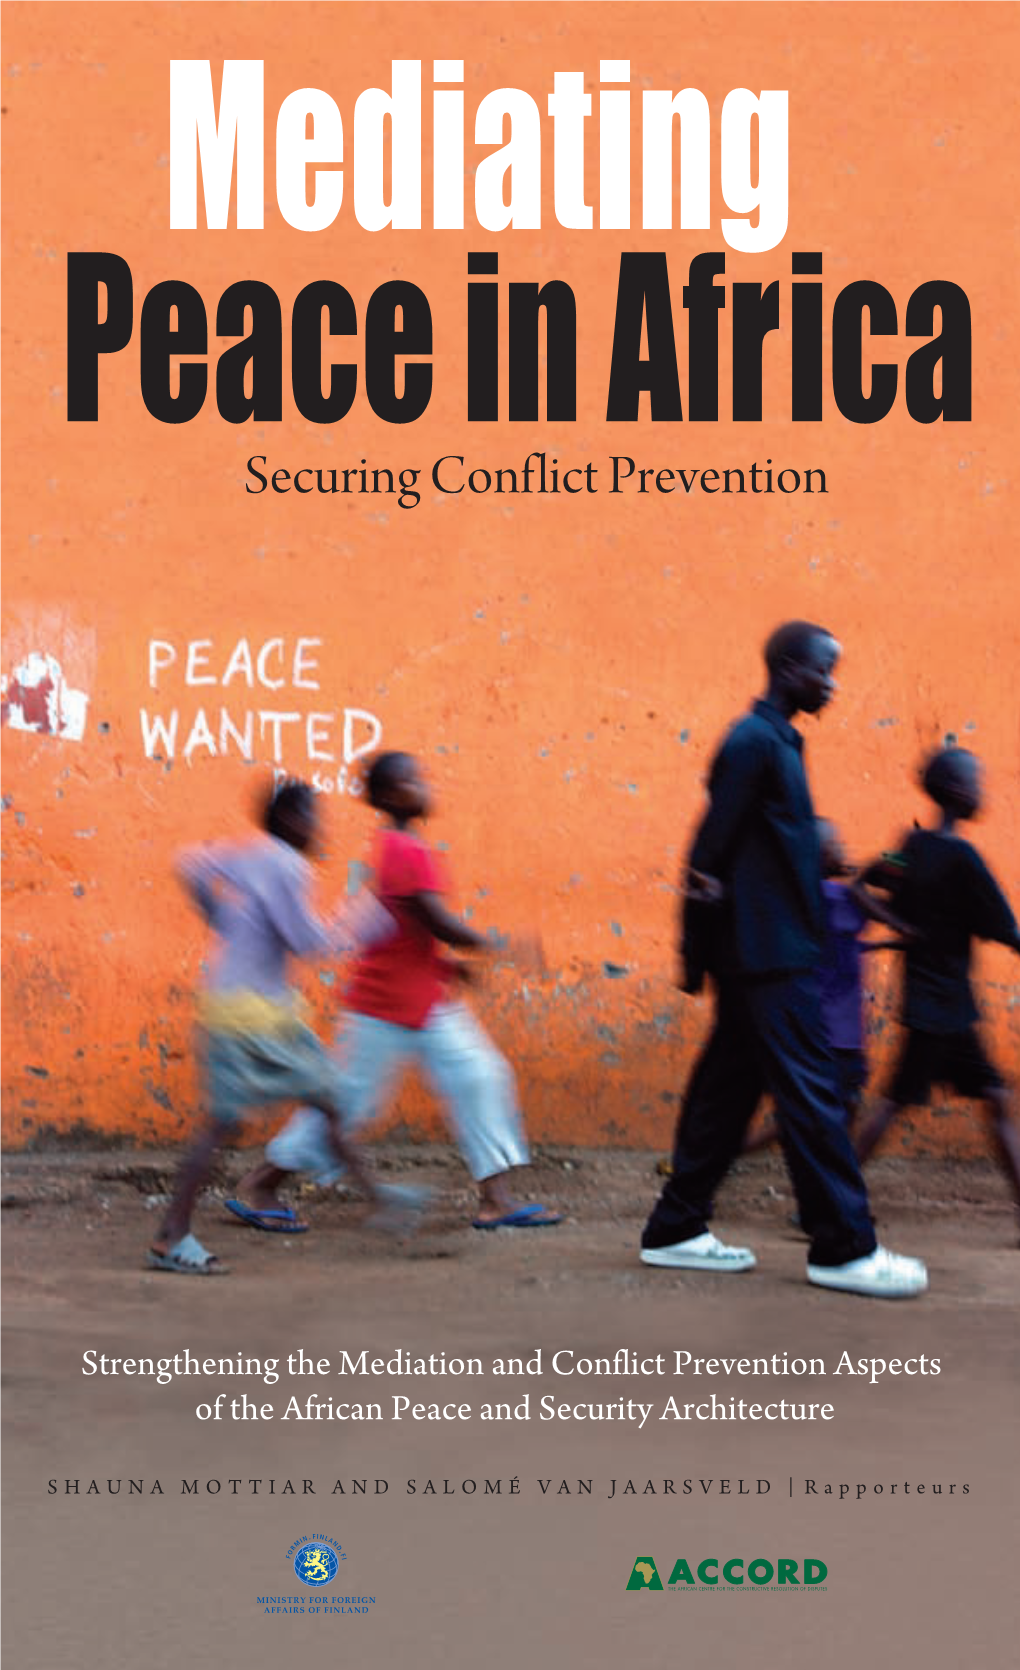 Mediating Peace in Africa: Securing Conflict Prevention Strengthening the Mediation and Conflict Prevention Aspects of the African Peace and Security Architecture